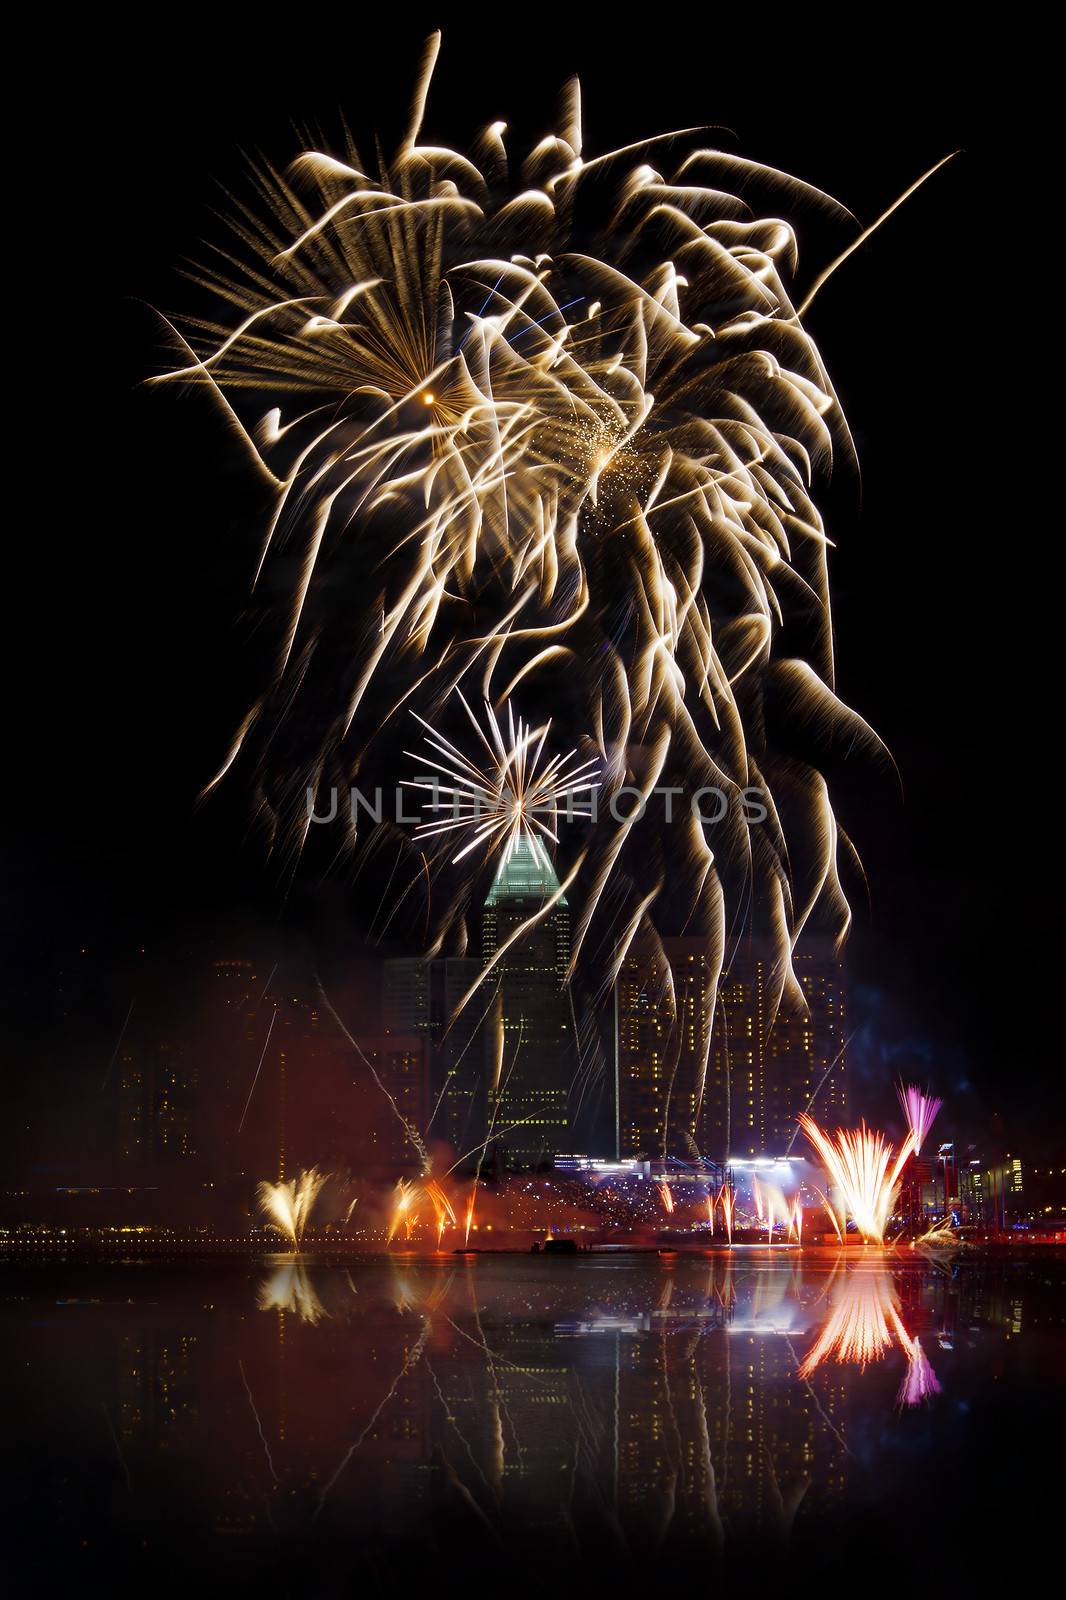 Fireworks over Marina bay in Singapore on National day